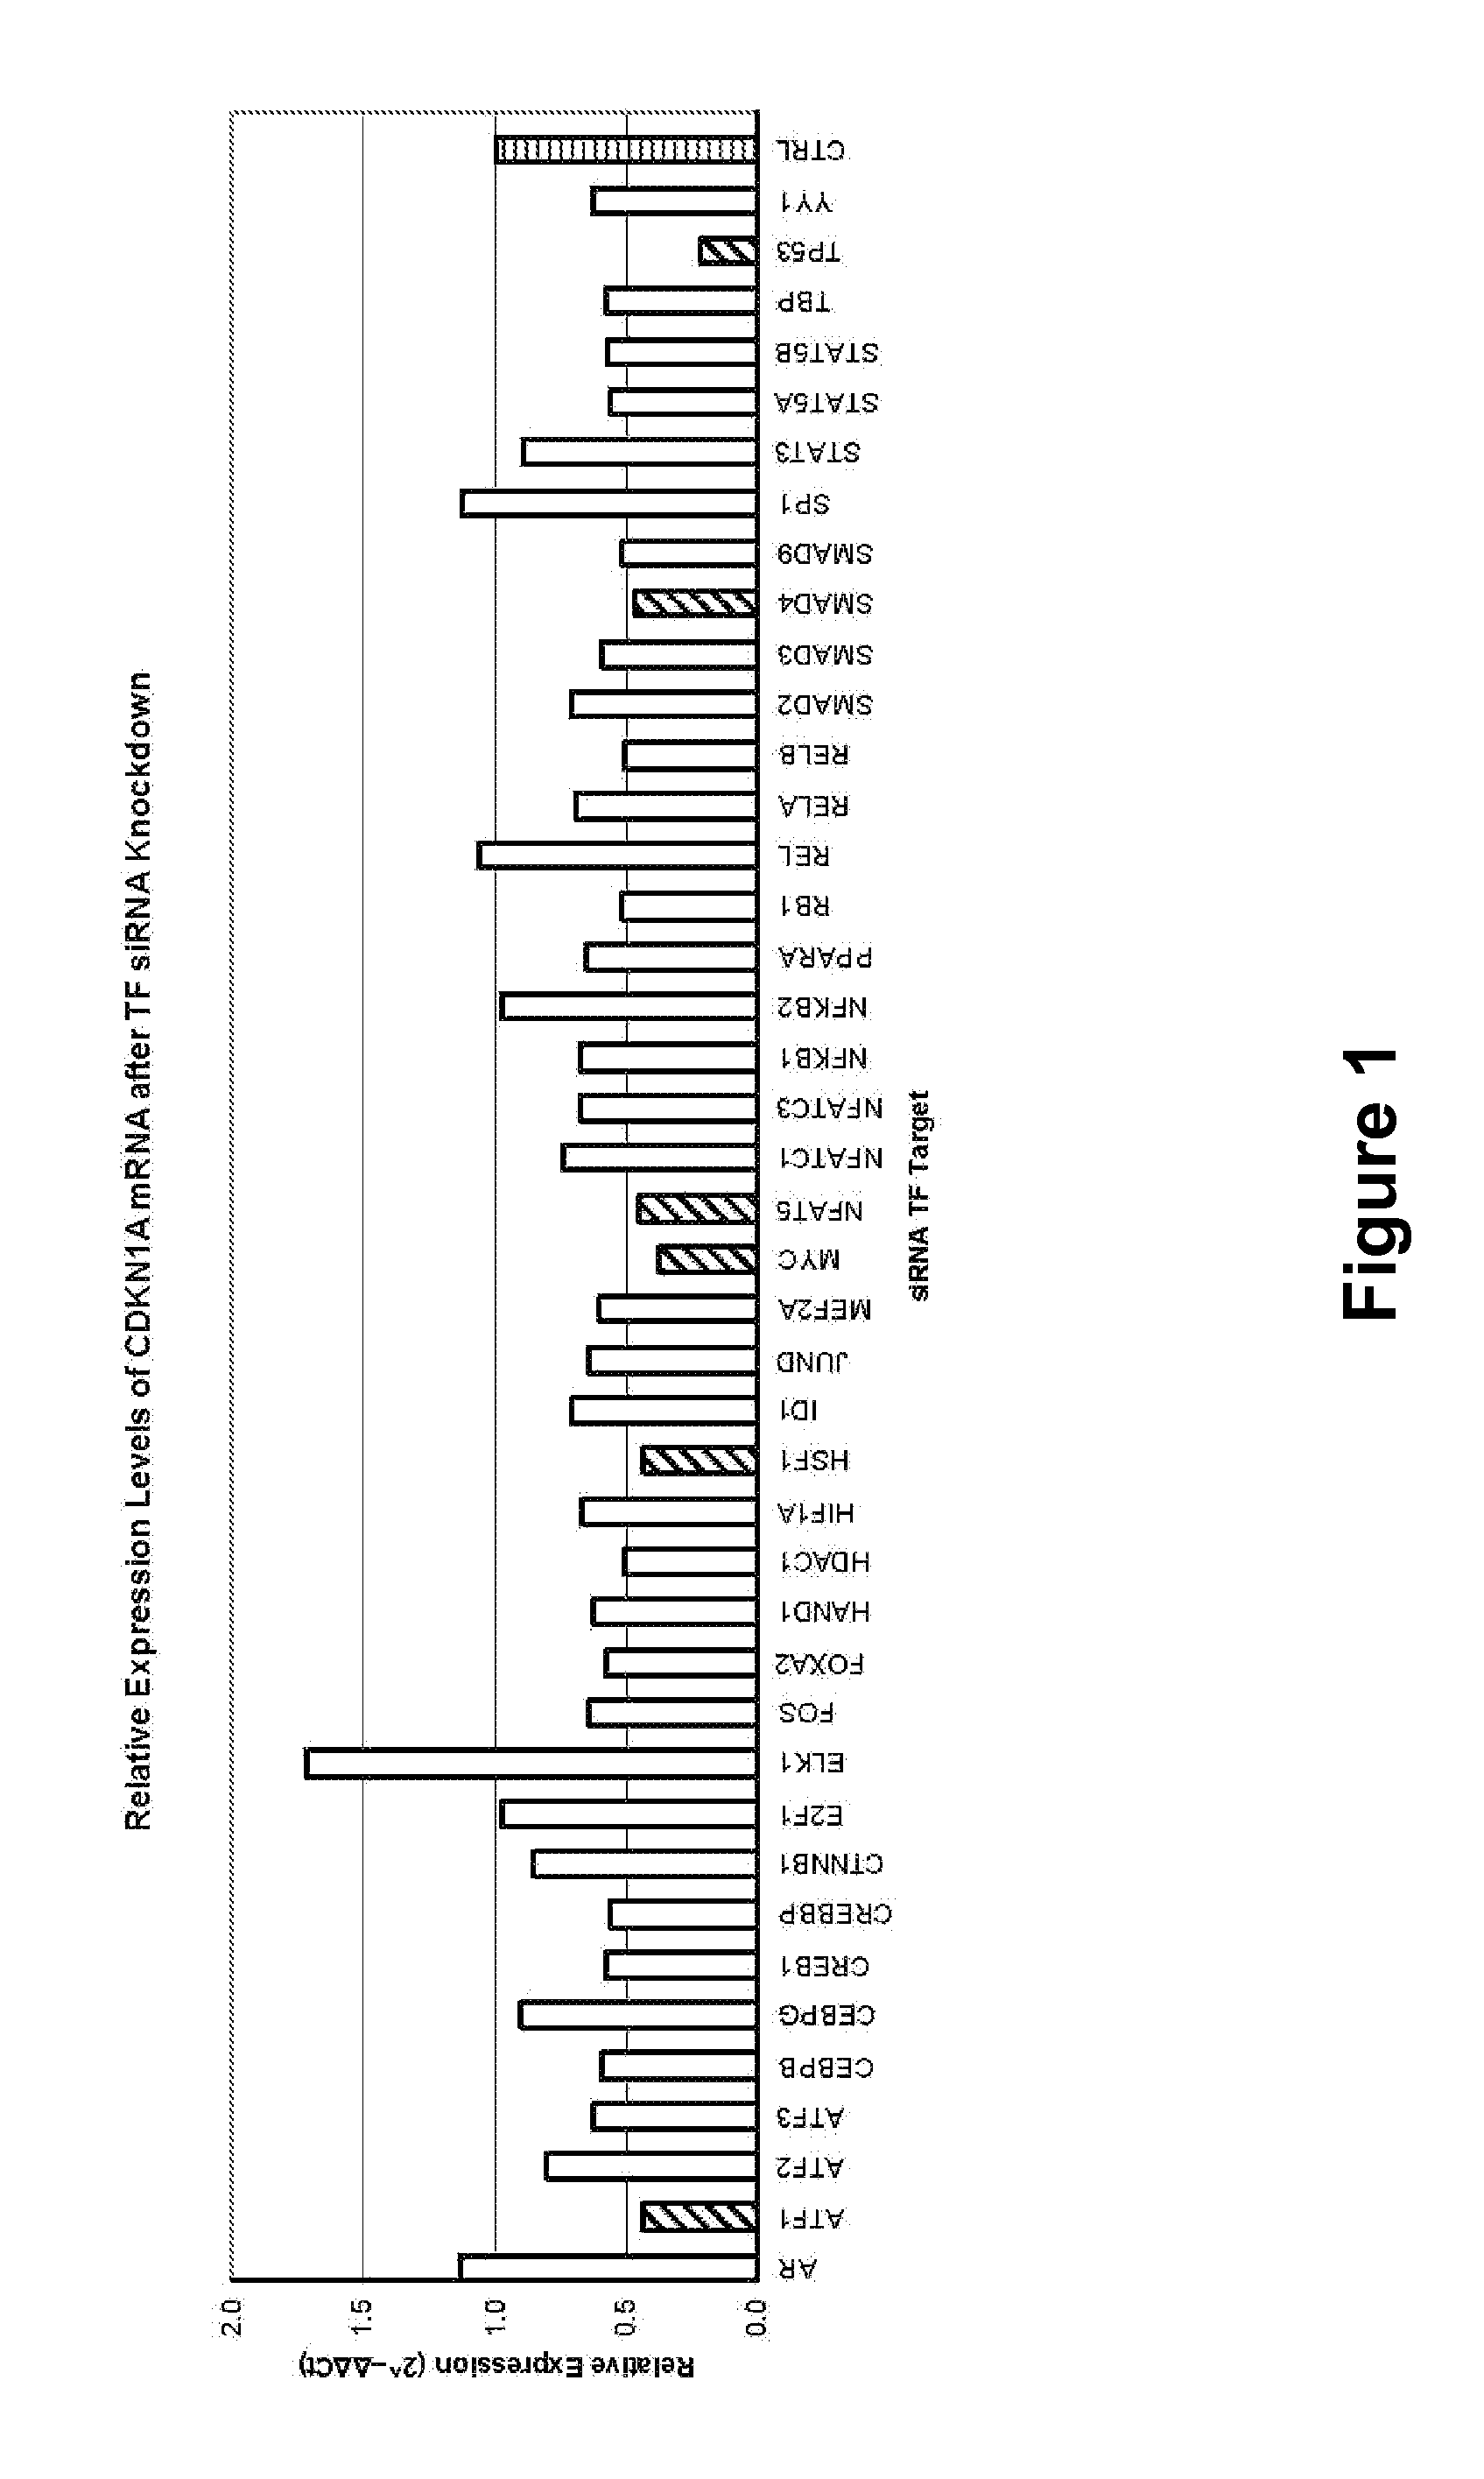 Arrays and Methods for Reverse Genetic Functional Analysis